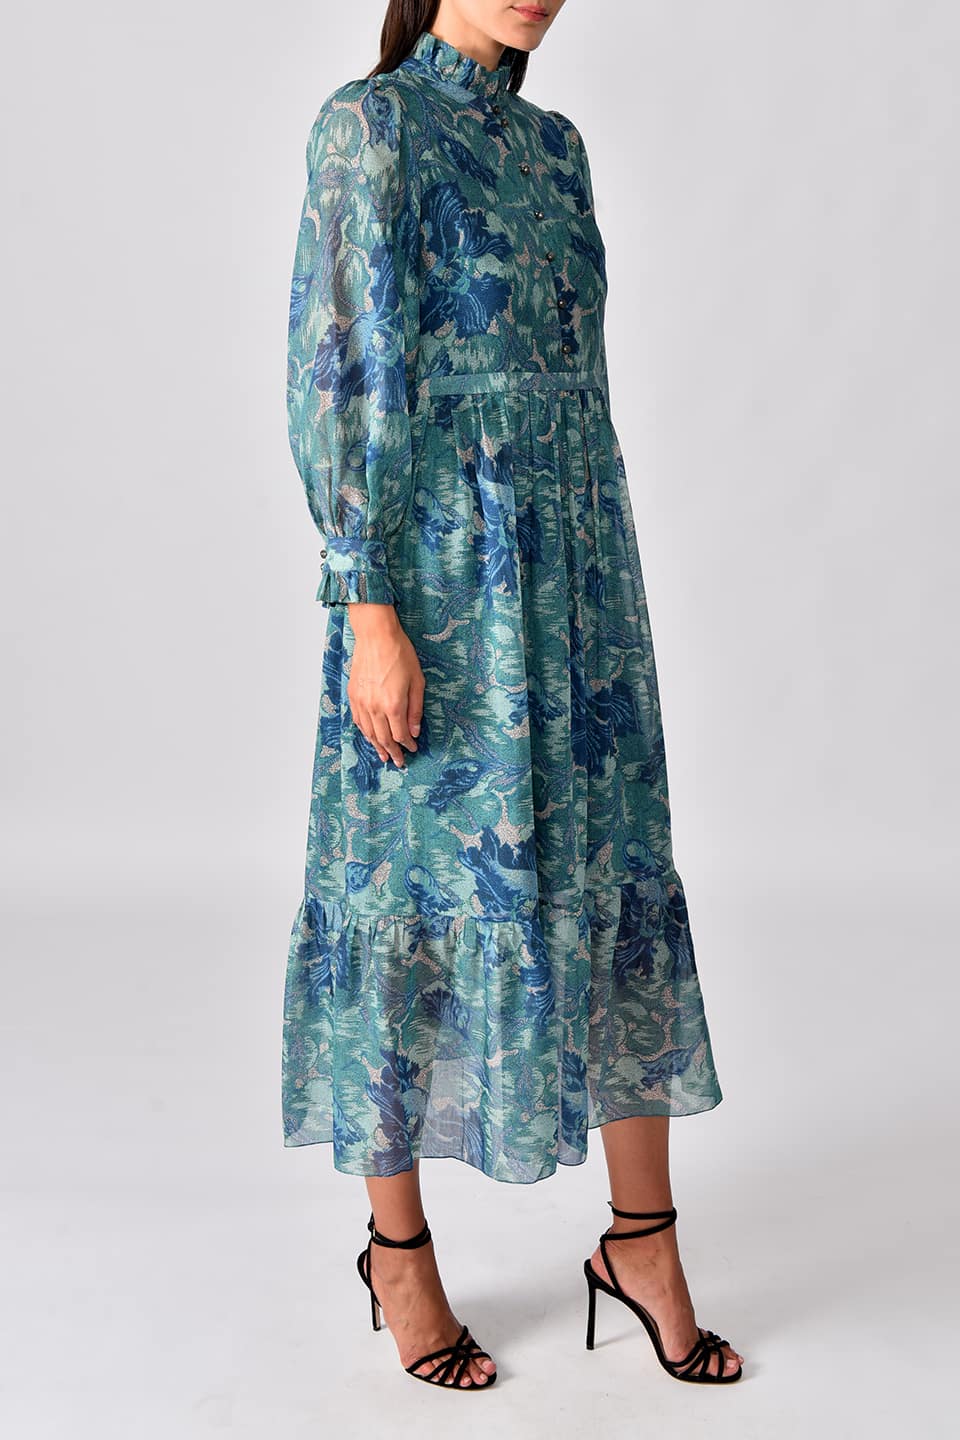 Thumbnail for Product gallery 3, Free delivery in UAE for luxury brand dress. Floral dress in blue color to shop online